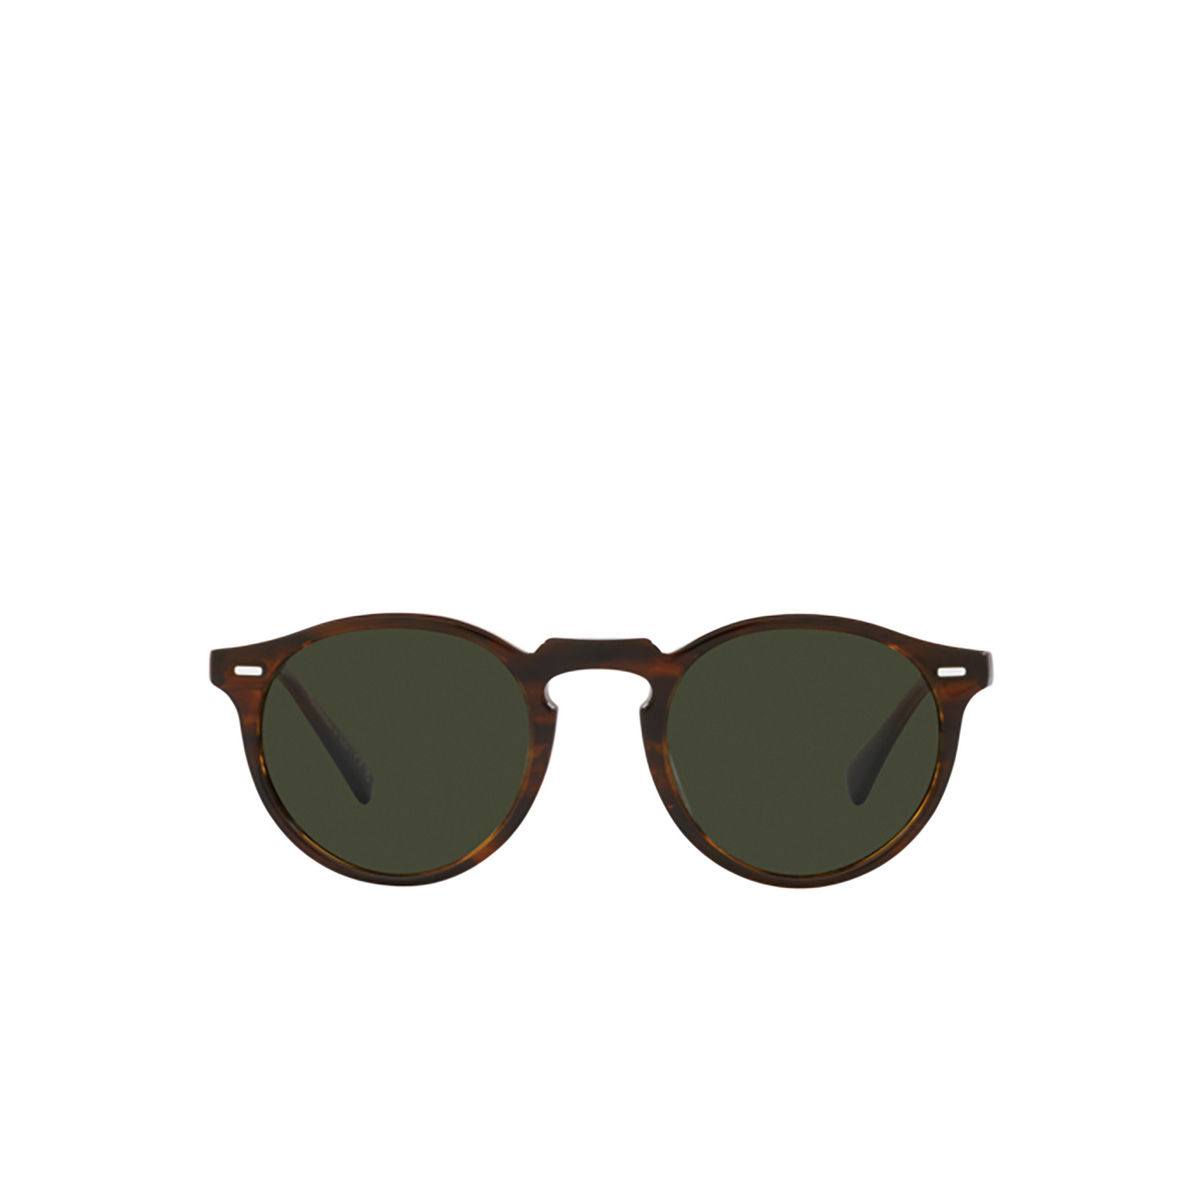 Occhiali da sole Oliver Peoples GREGORY PECK 1724P1 Tuscany Tortoise - frontale